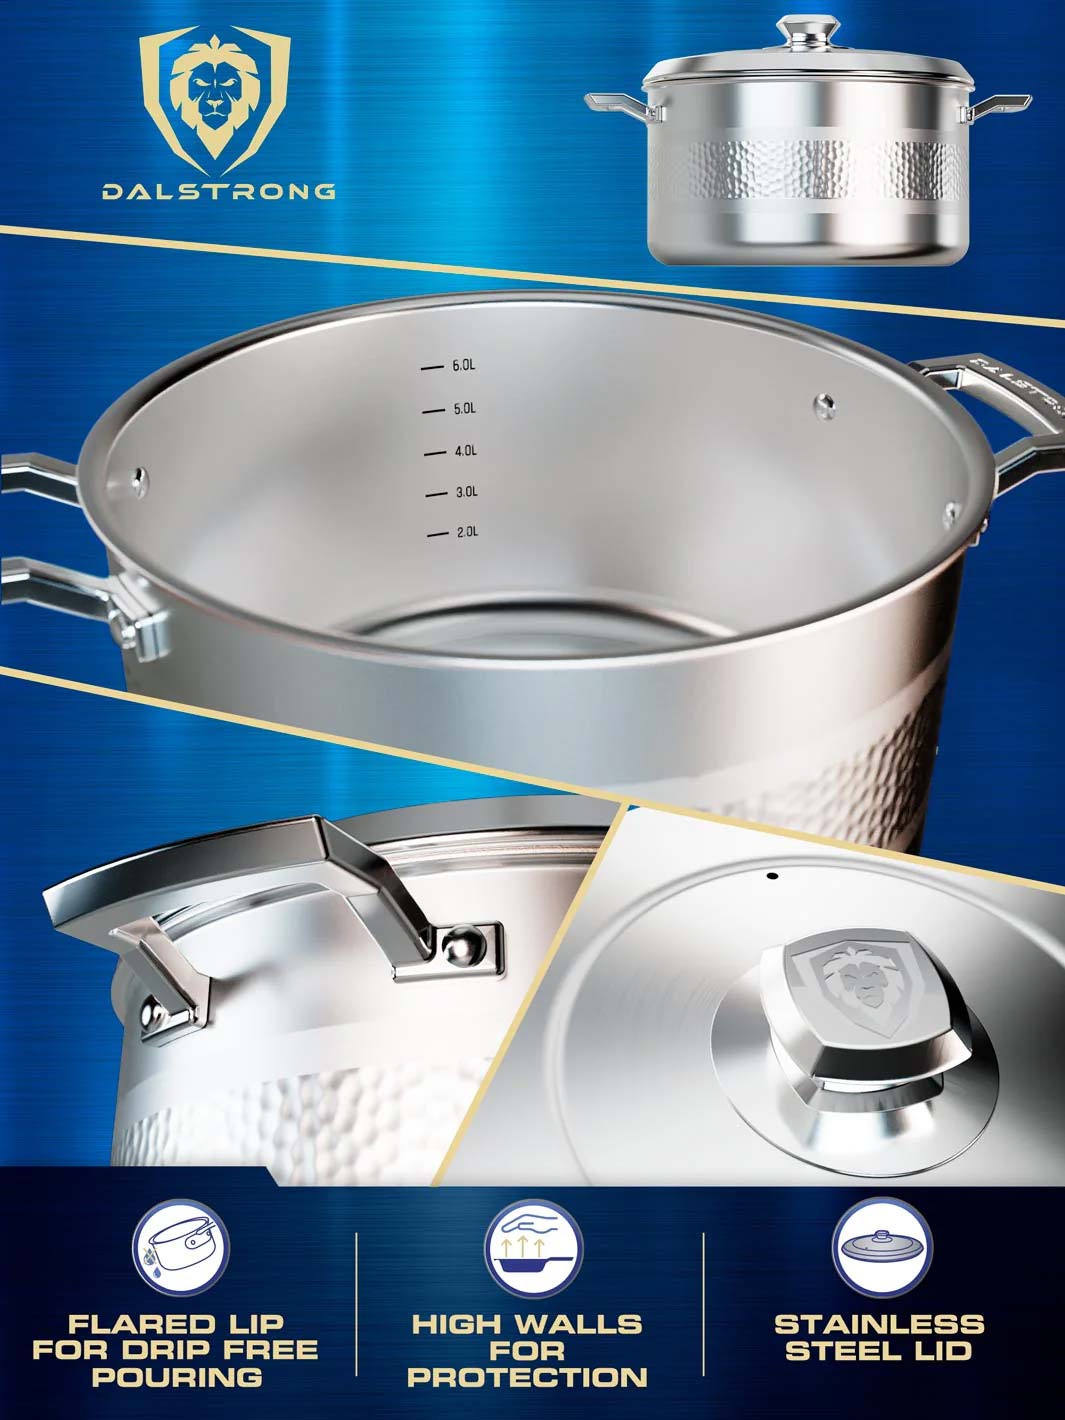 Dalstrong 3 Quart Stock Pot - The Avalon Series - 5-Ply Copper Core - Hammered Finish - Silver Cookware- w/Lid & Pot Protector